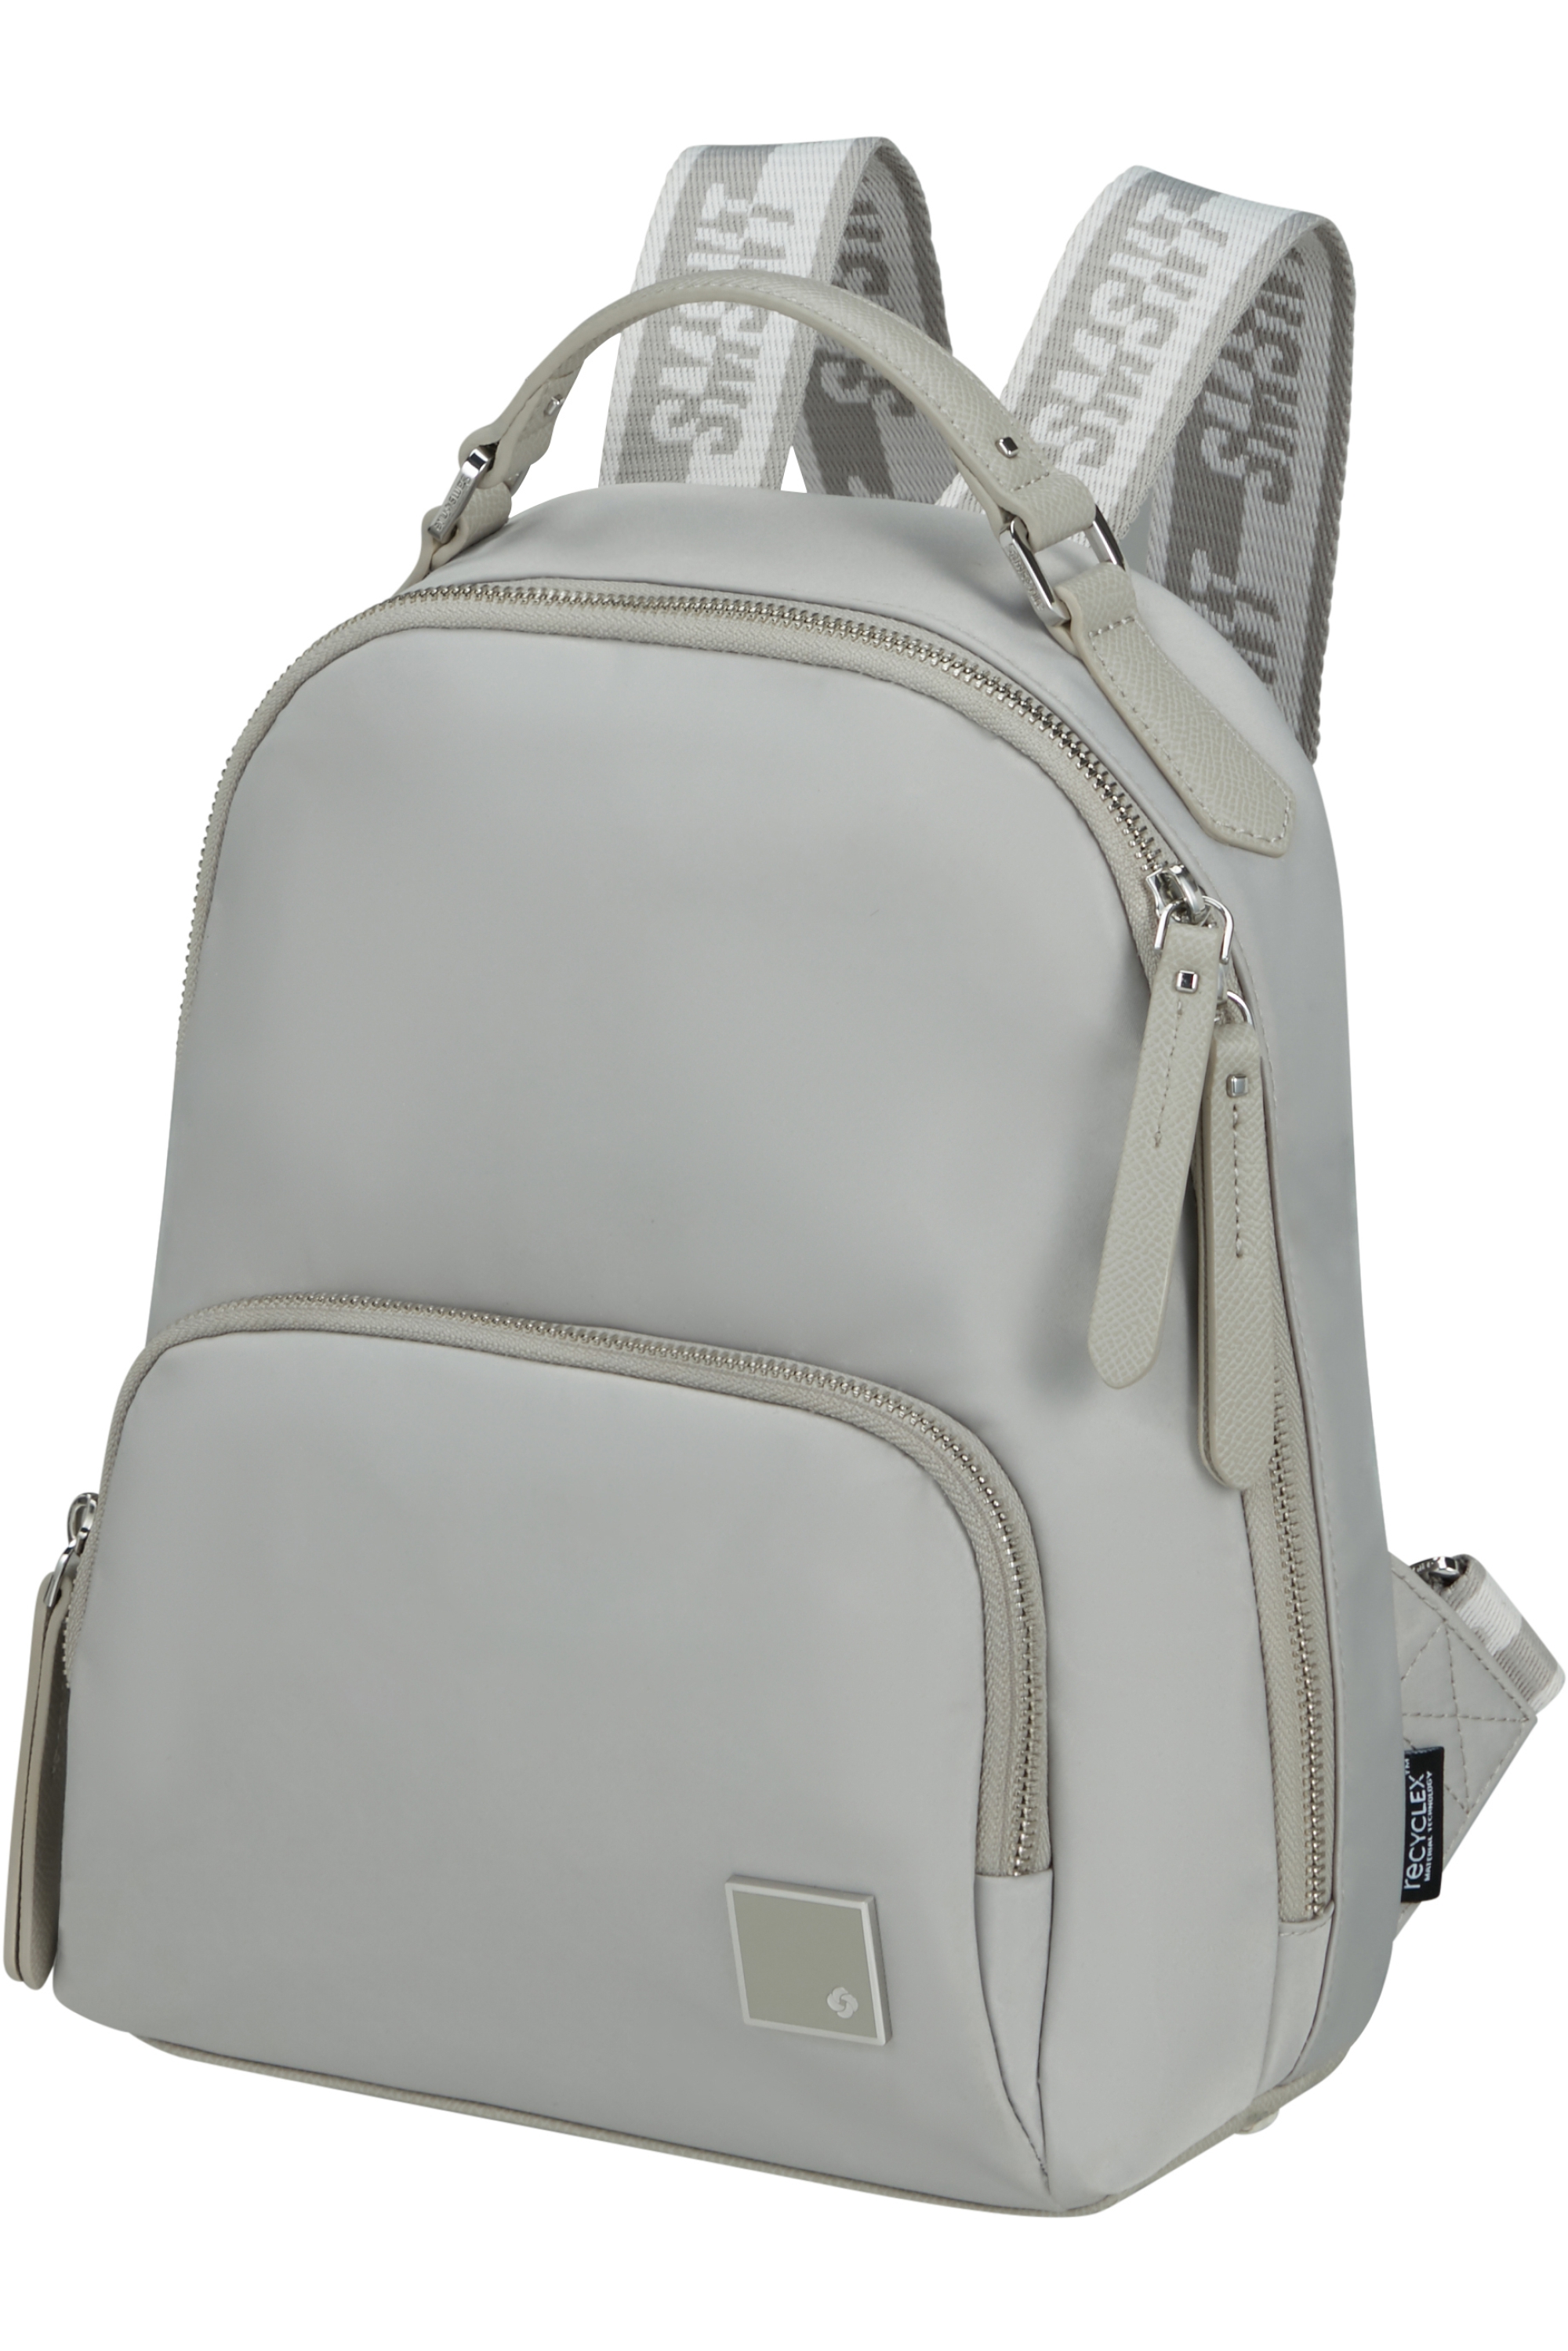 142821-1301-142821_1301_essentially_karissa_backpack_s_smsnt_front34-520d7f2b-acac-4c14-9e16-ad8000d9afbb-png